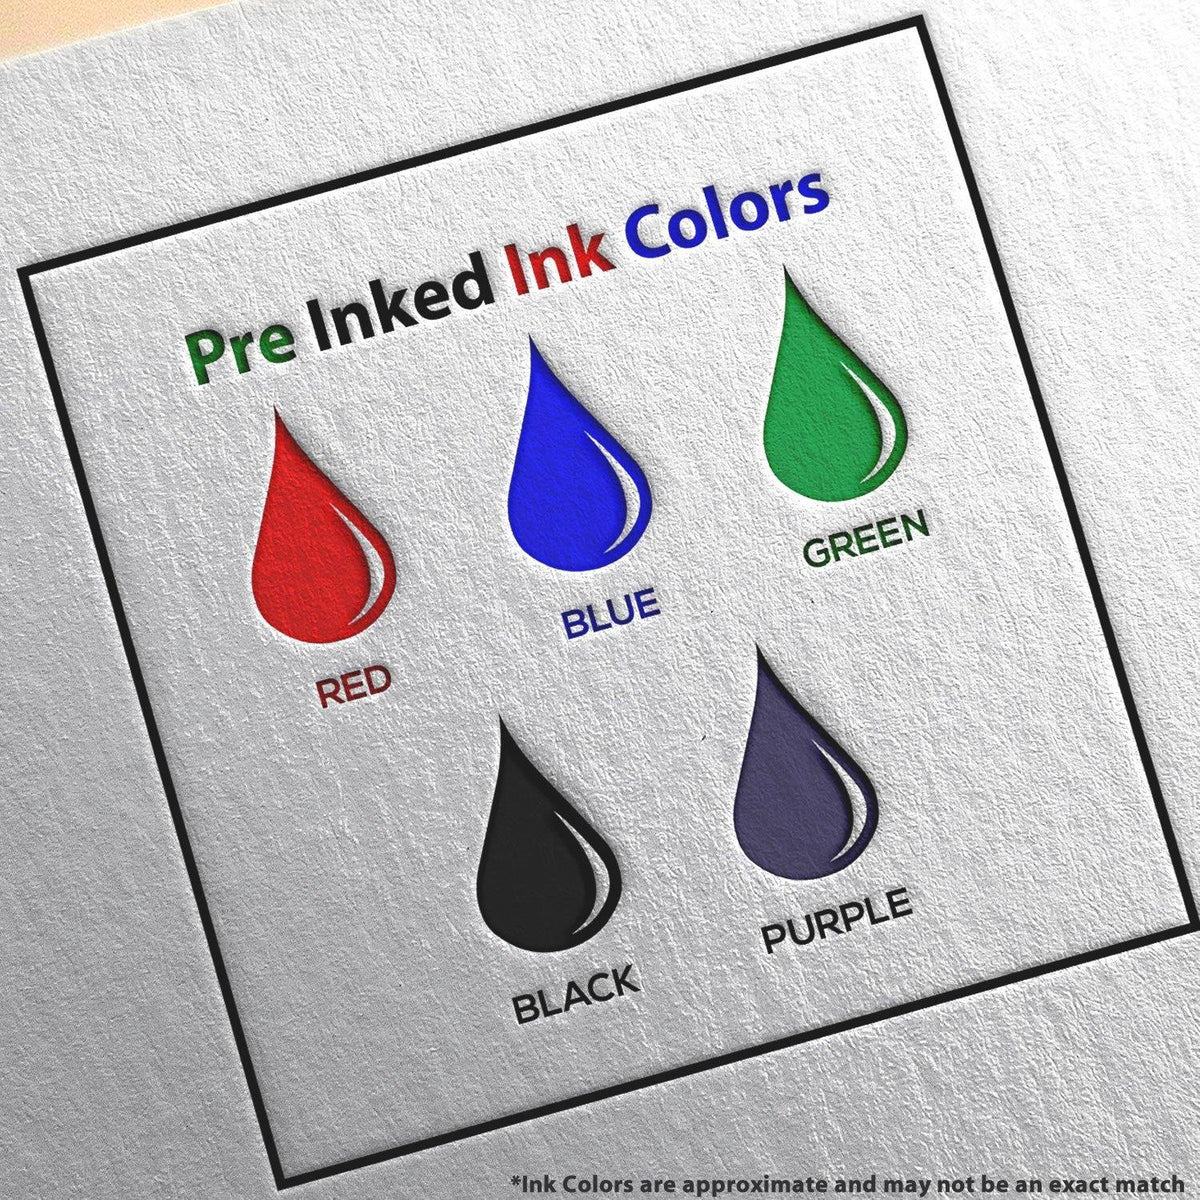 Slim Pre-Inked Please Pay Now No Statements will be Sent Stamp Ink Color Options